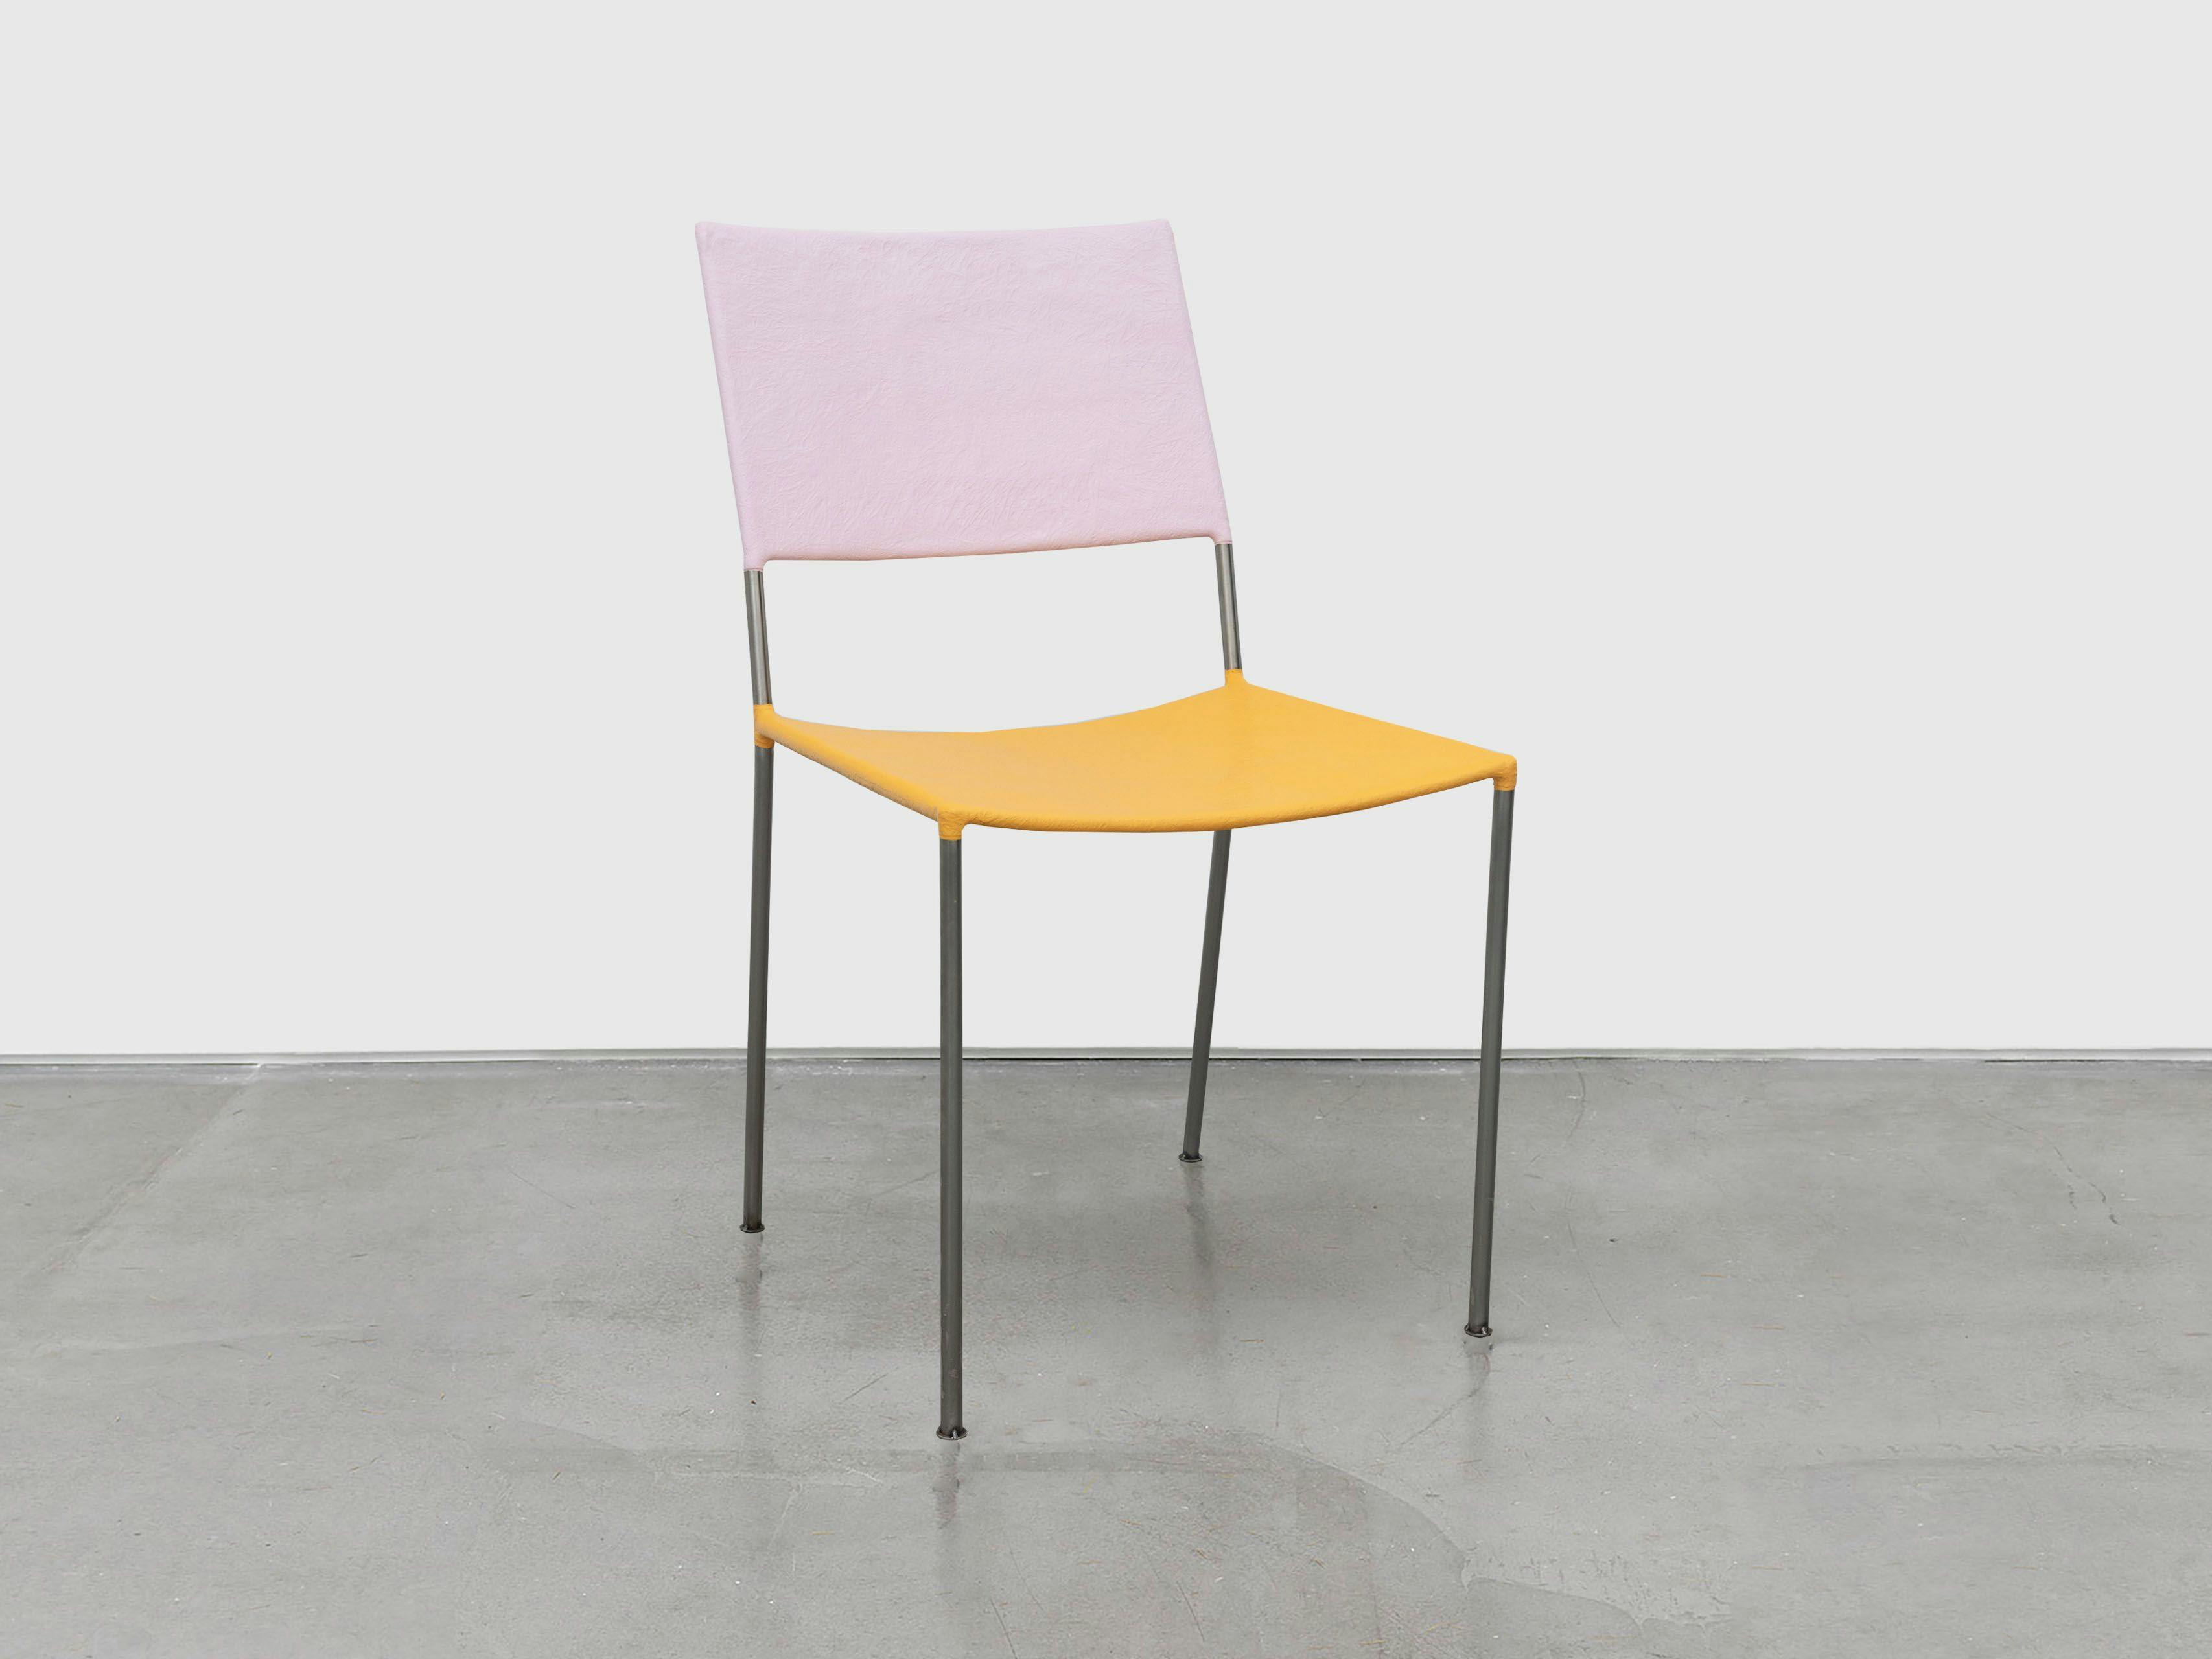 A chair by Franz West, titled Künstlerstuhl (Artist's Chair), dated in 2006 and 2022.